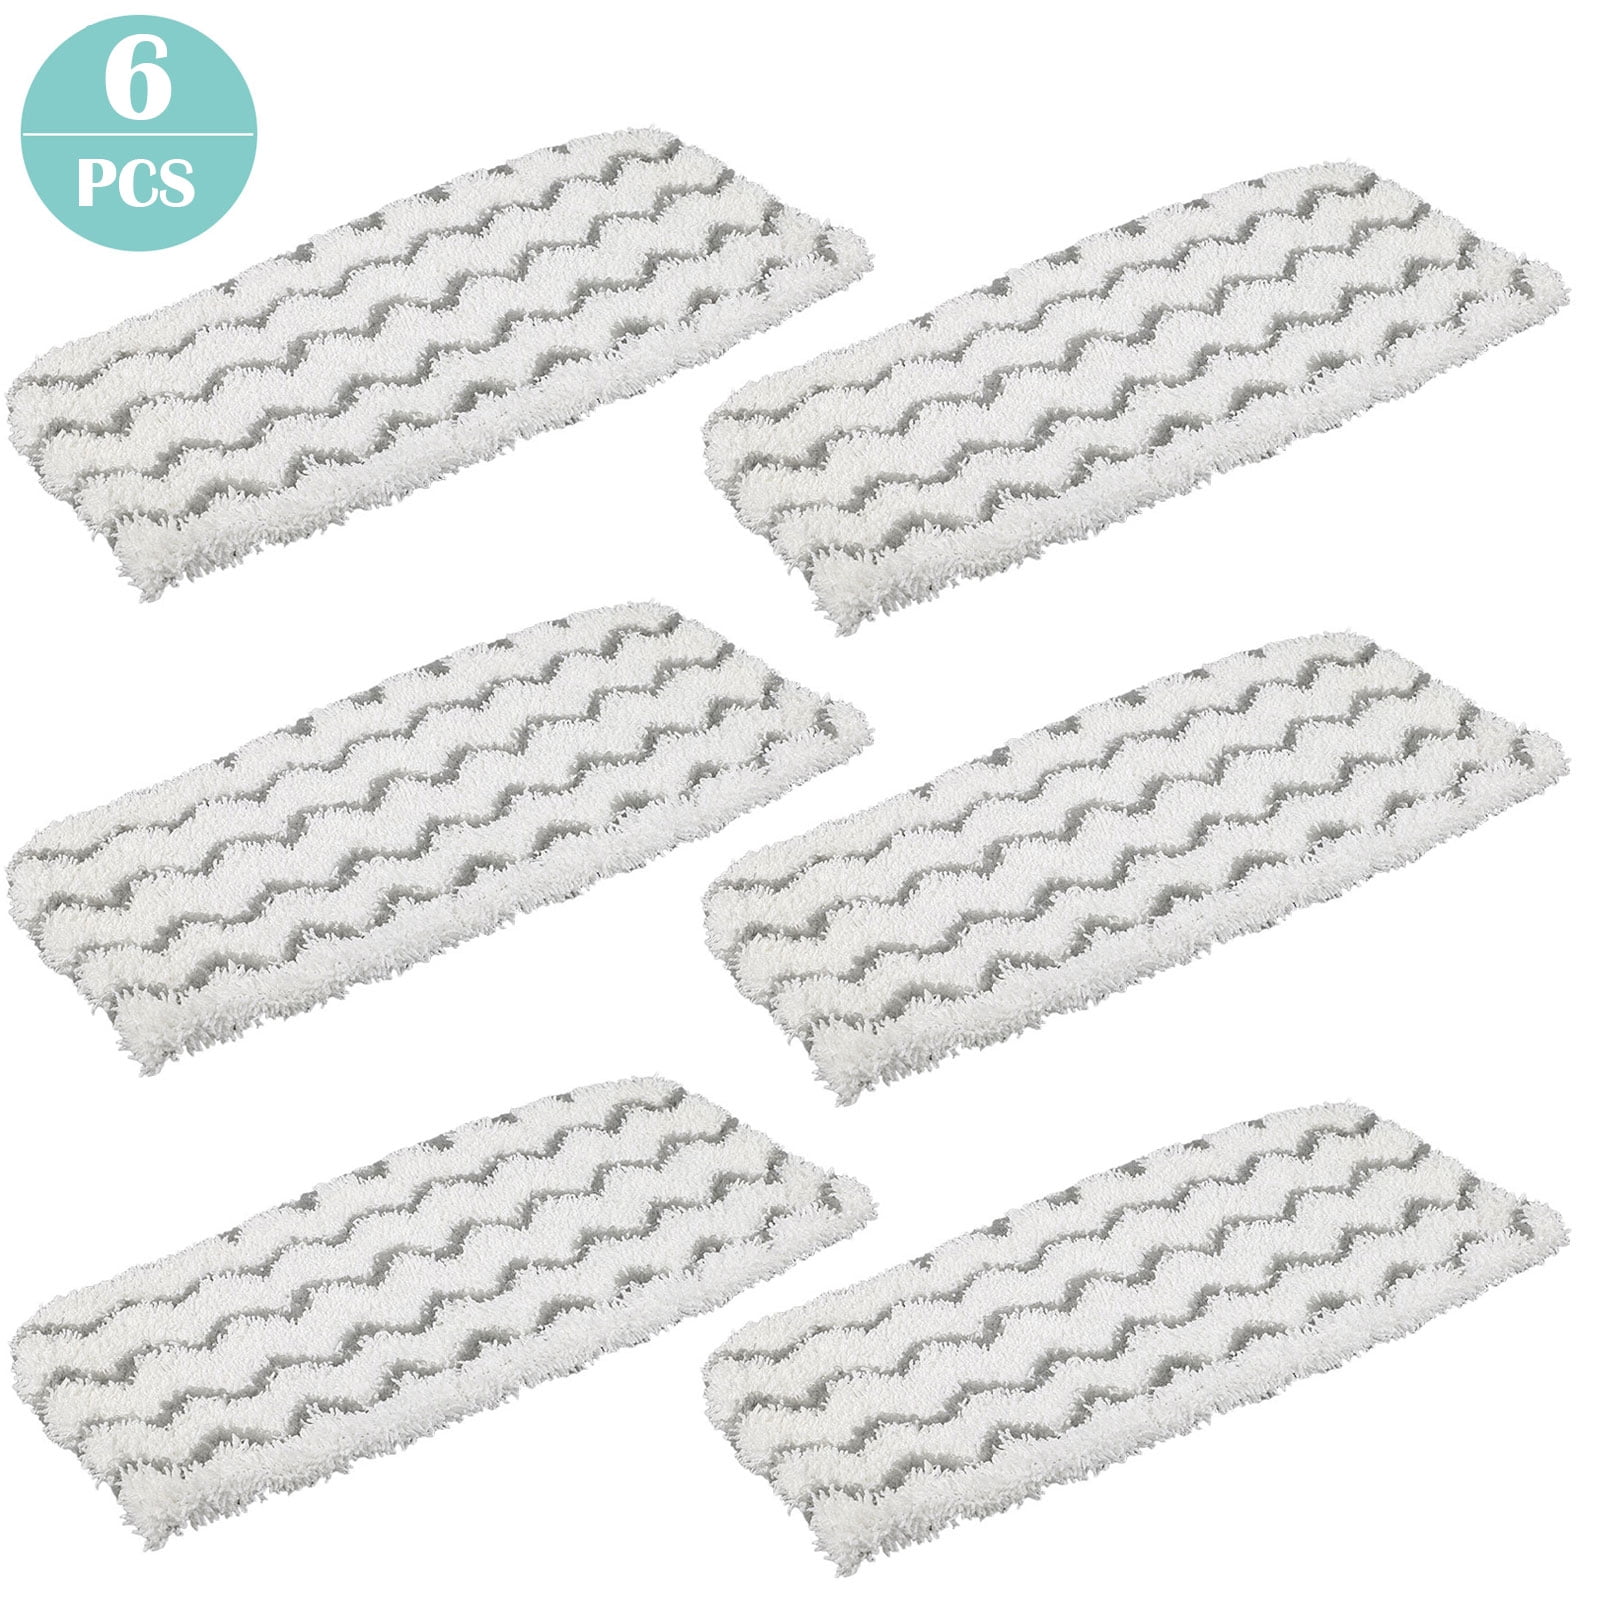 Microfiber Replacement Pads for Shark Steam Euro-Pro Mop 6 PCS 